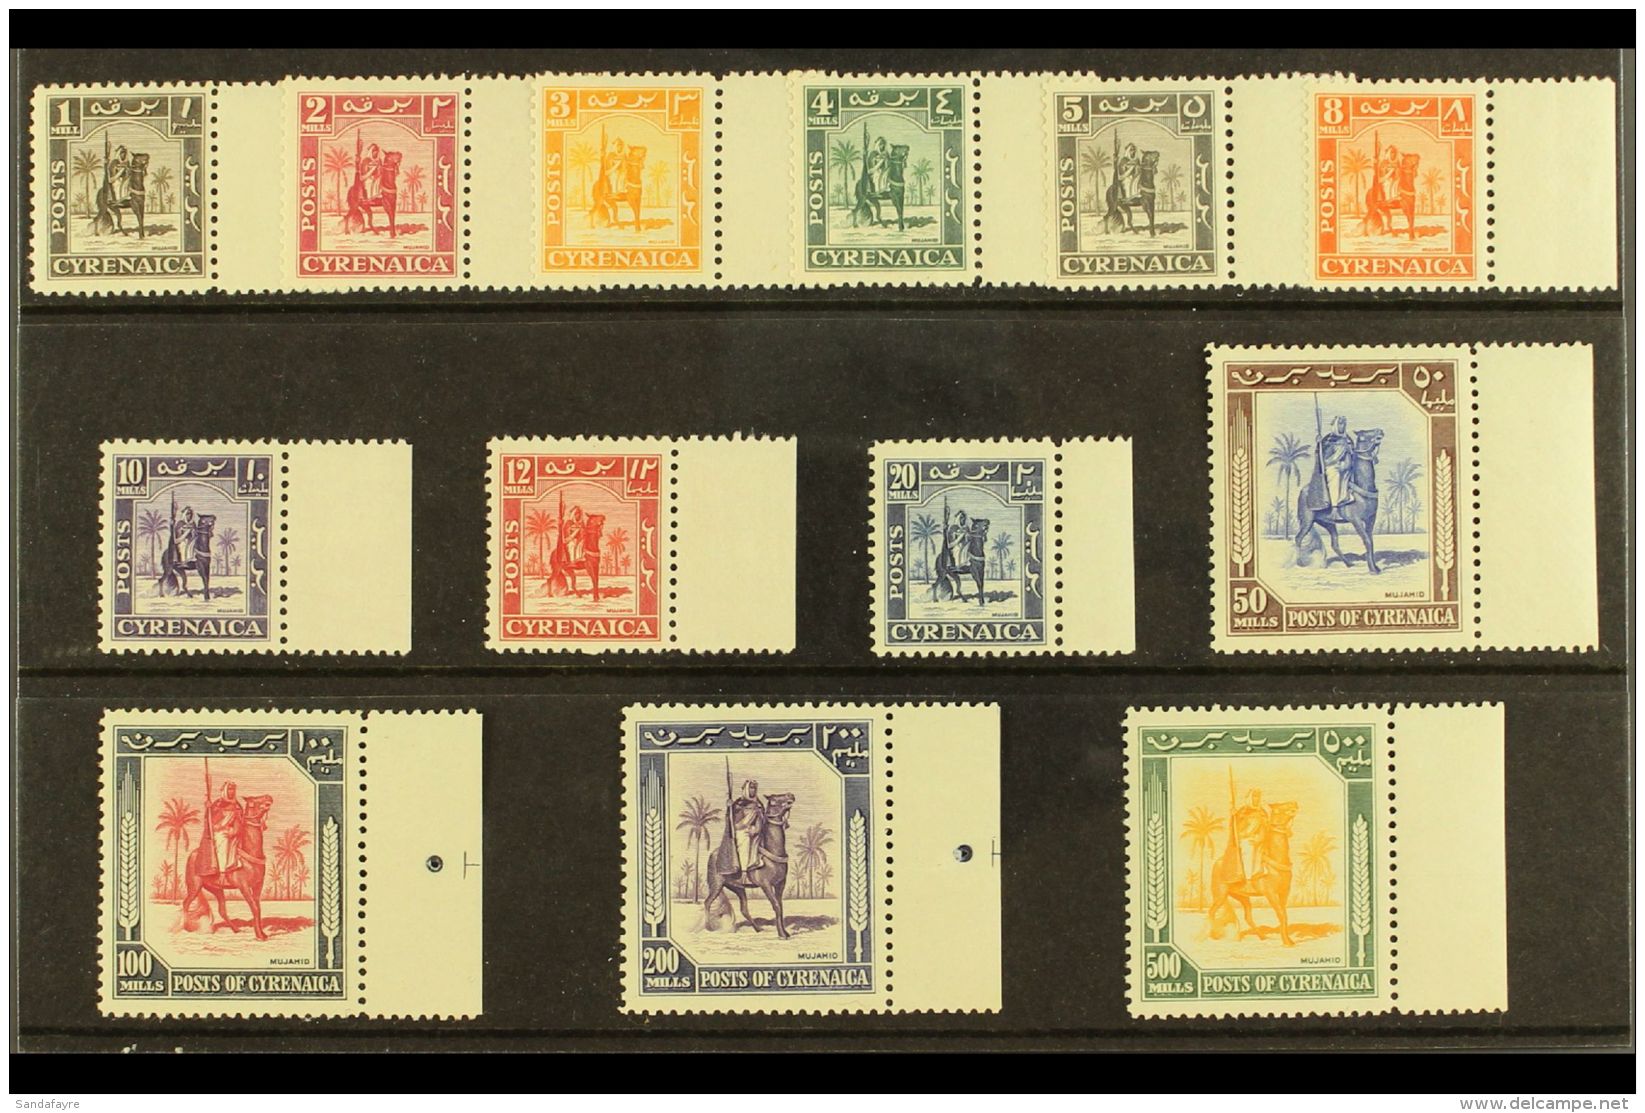 CYRENAICA 1950 "Mounted Warrior" Definitives Complete Set, SG 136/48, Very Fine Never Hinged Mint Matching... - Italian Eastern Africa